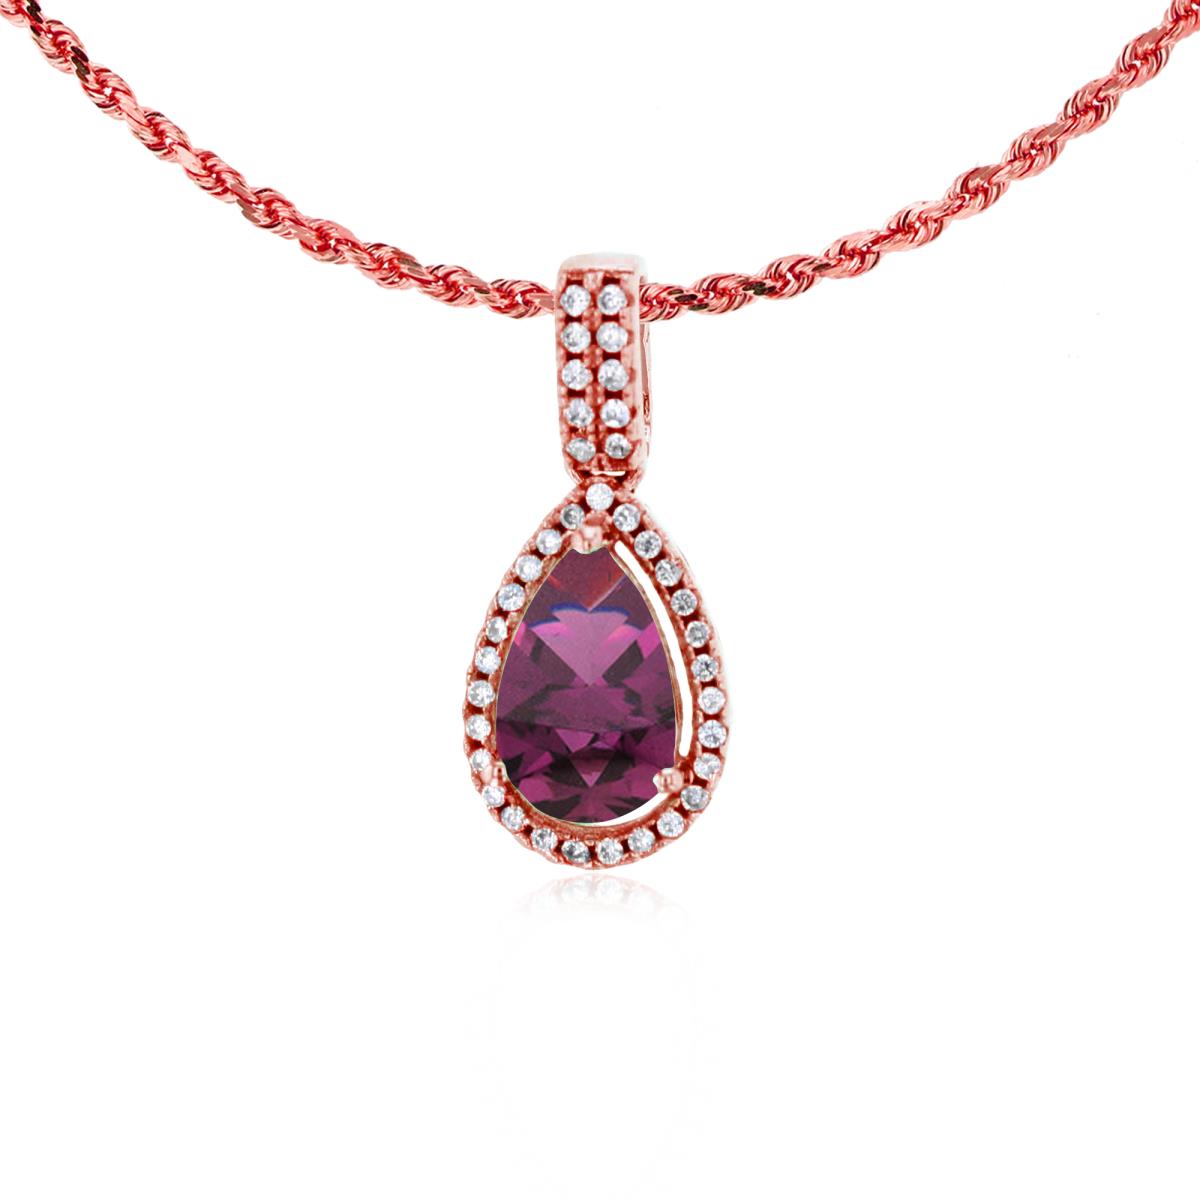 10K Rose Gold 8x5mm Pear Cut Rhodolite & 0.11 CTTW Diamond Halo 18" Rope Chain Necklace